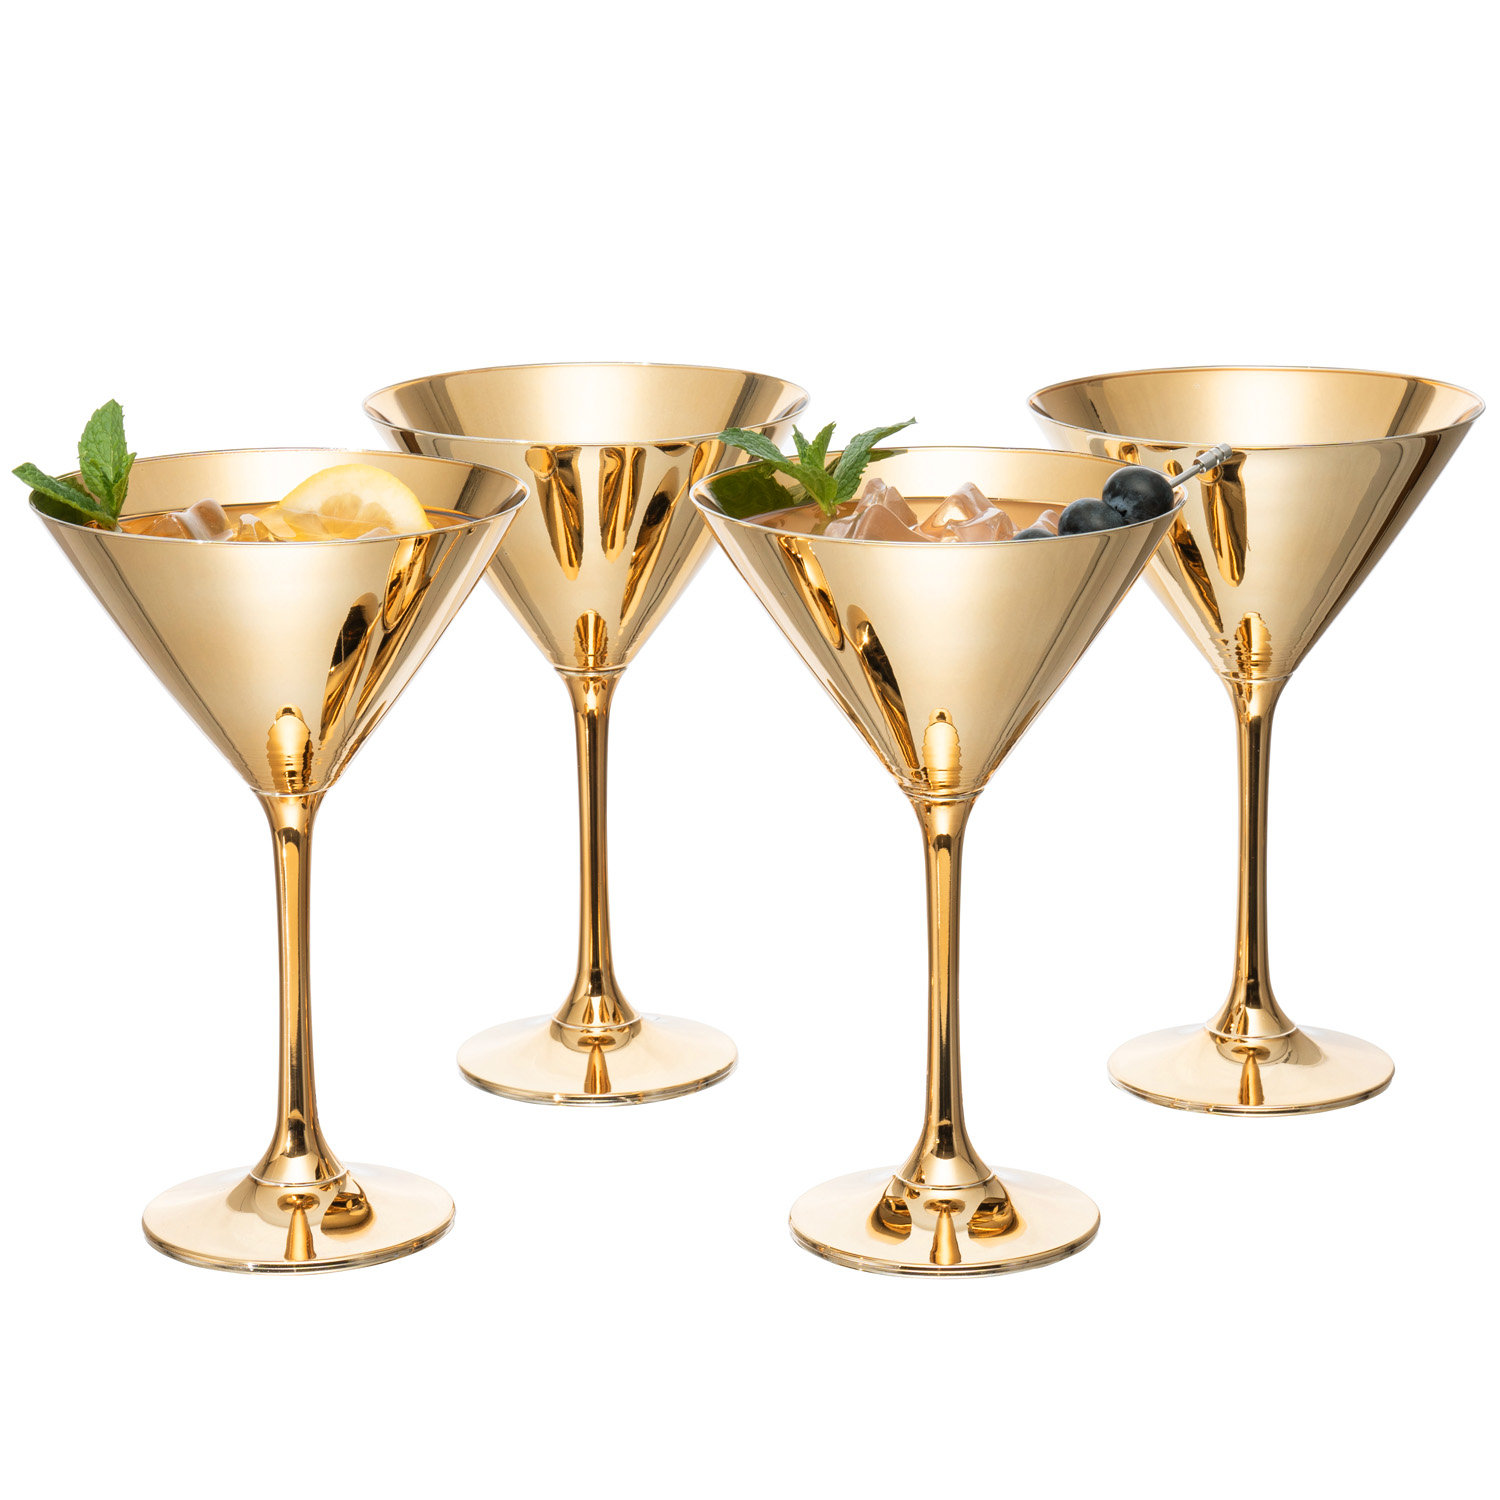 12 oz Gold Stainless Steel Wine Glasses, Set of 4 – Cambridge Silversmiths®